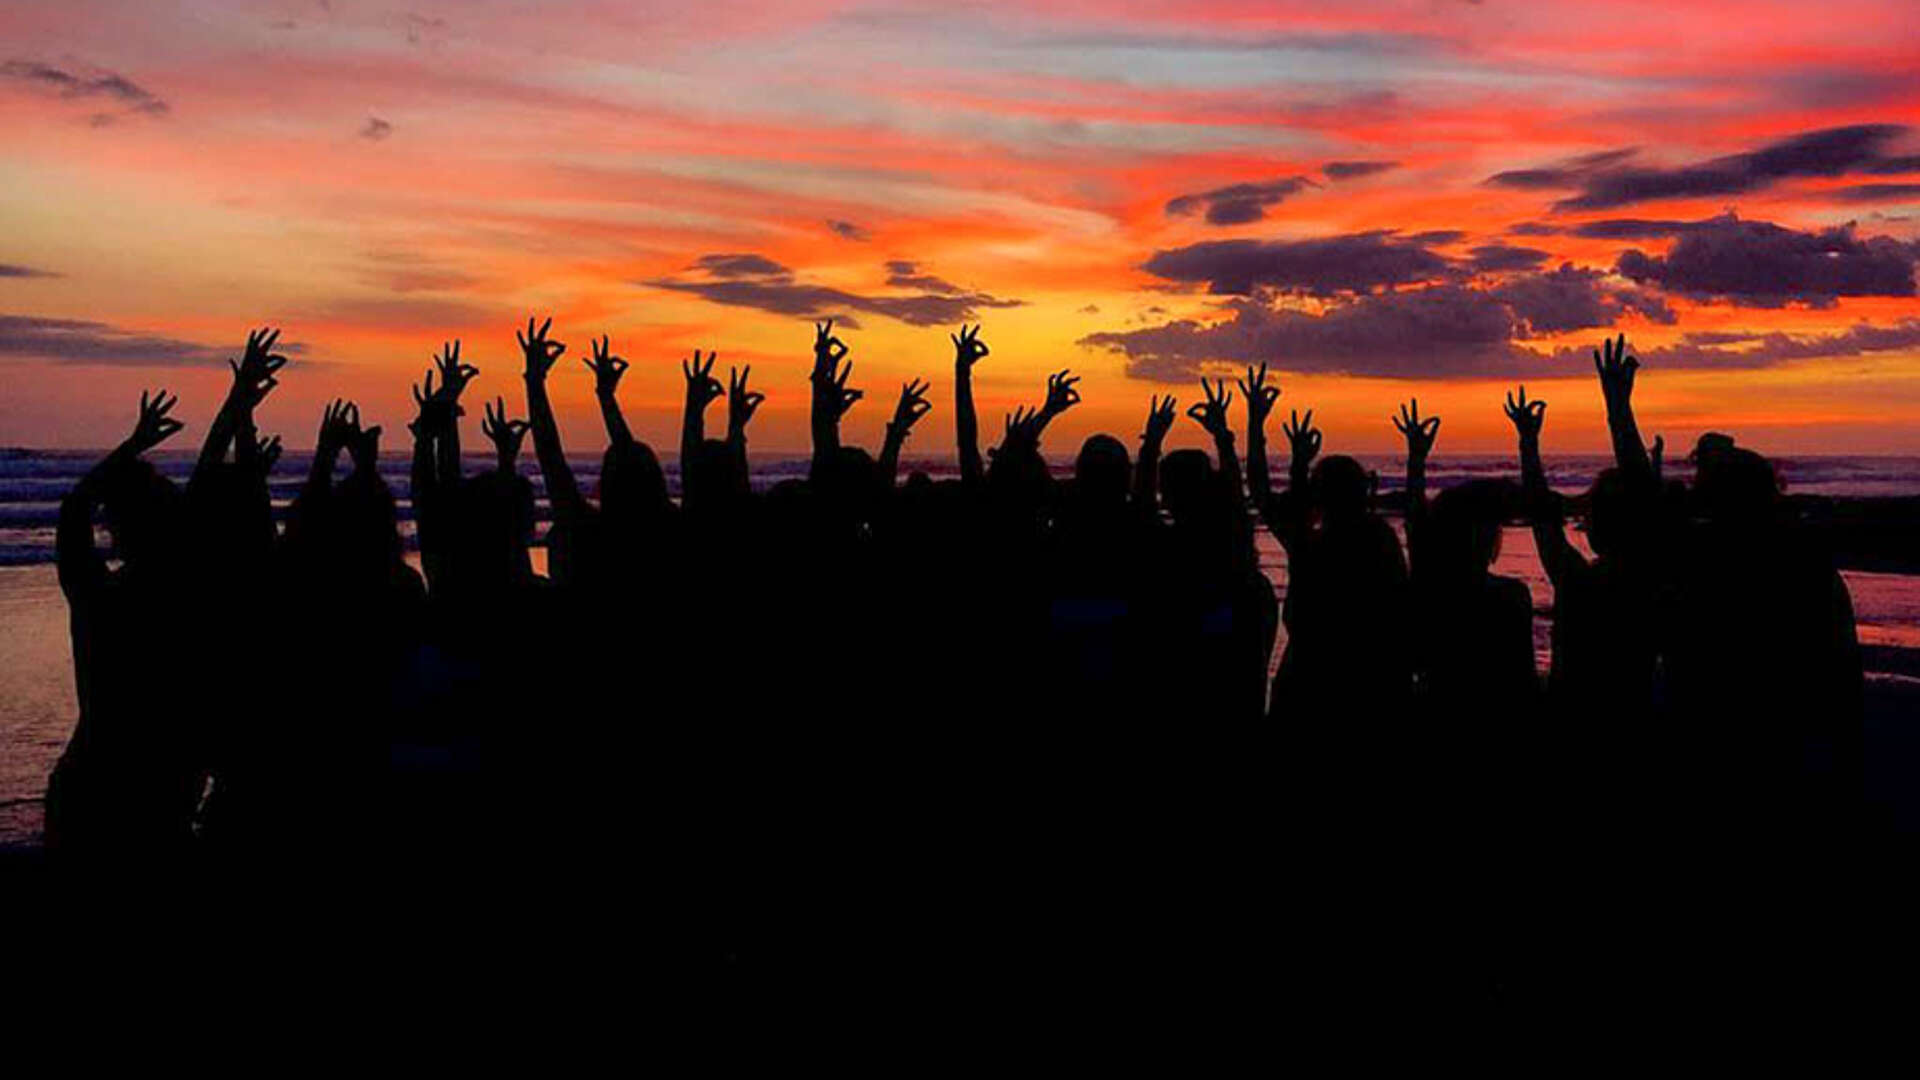 Lady Chap soccer team puts their chap hand sign up against the Costa Rica sunset